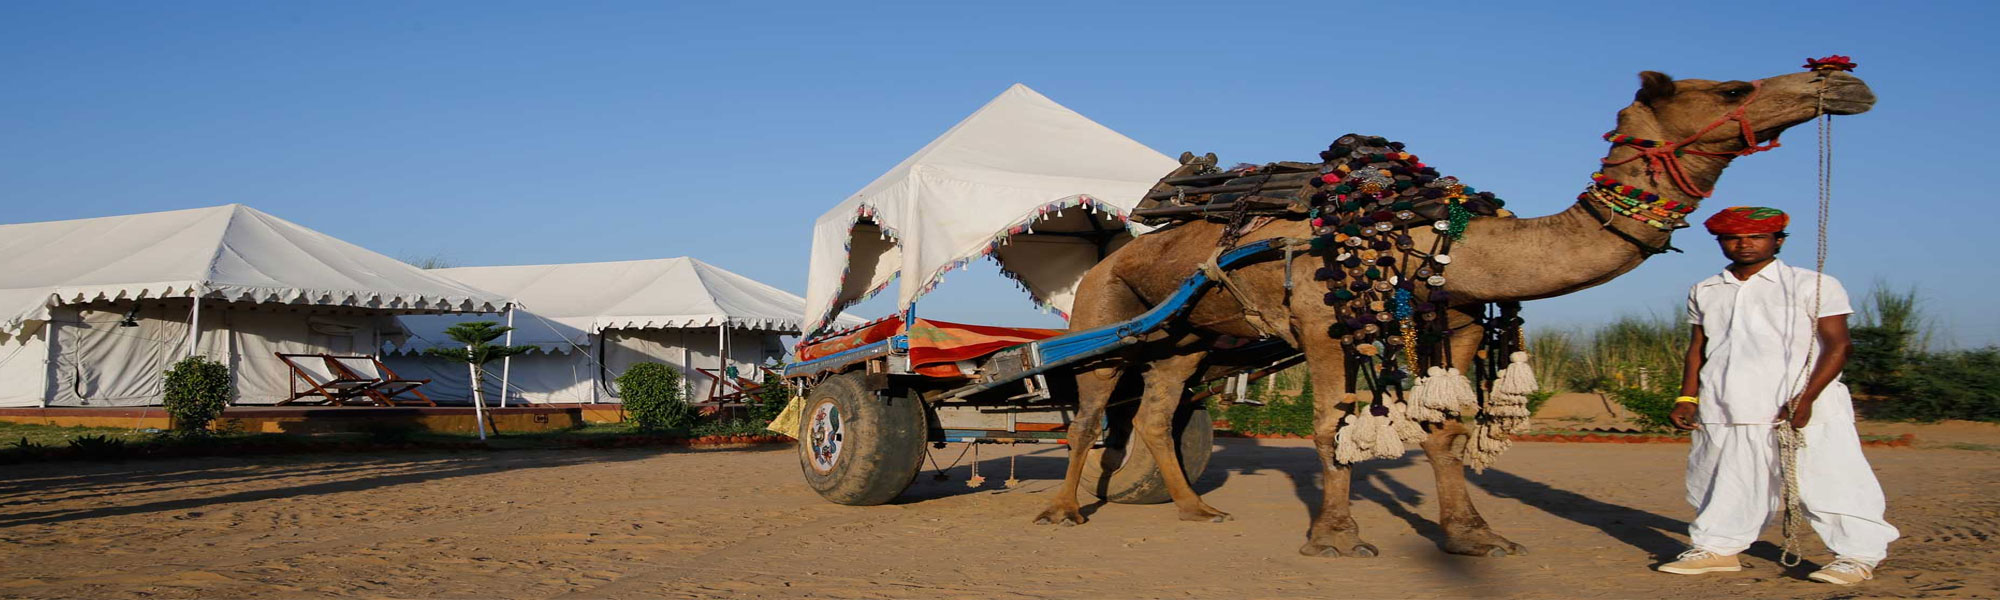 Heritage Tours in India with Camel Safari Tours in India